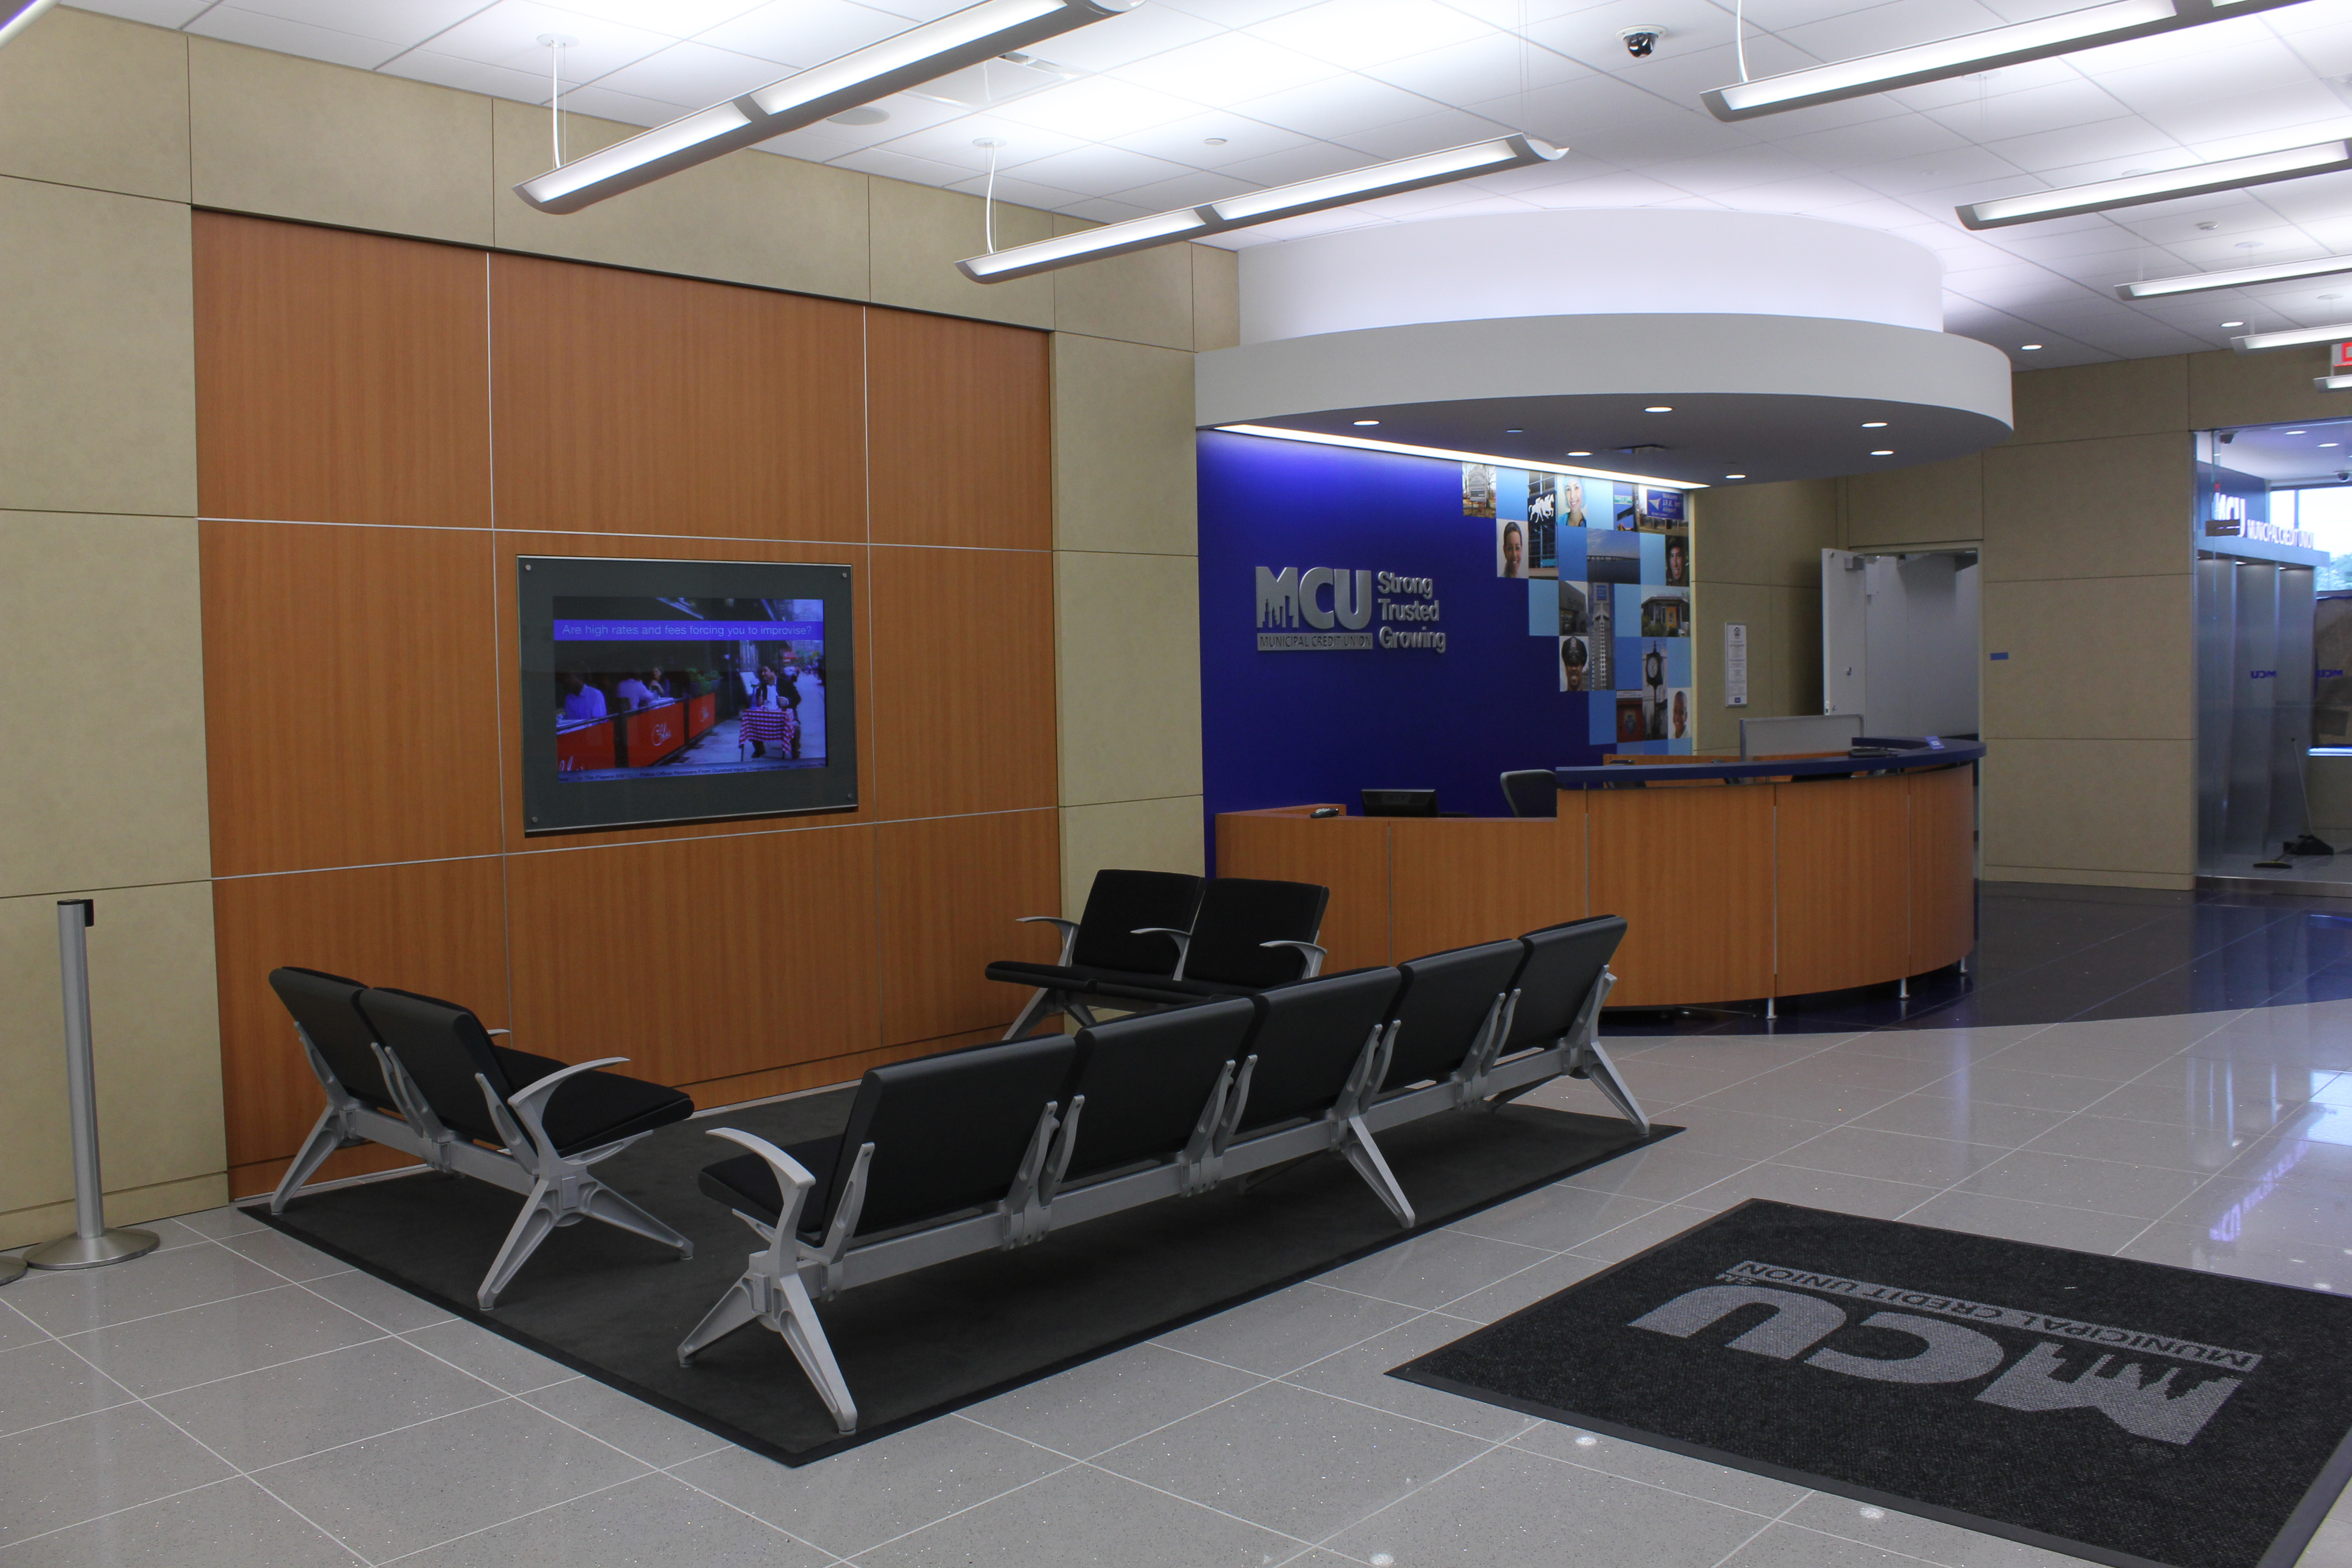 Municipal Credit Union: Talisen Construction Corporation: Construction Management and General Contractor. Municipal Credit Union, 134-66 Springfield Boulevard, Queens: Waiting area with rows of chairs surrounding an in-wall flat screen TV